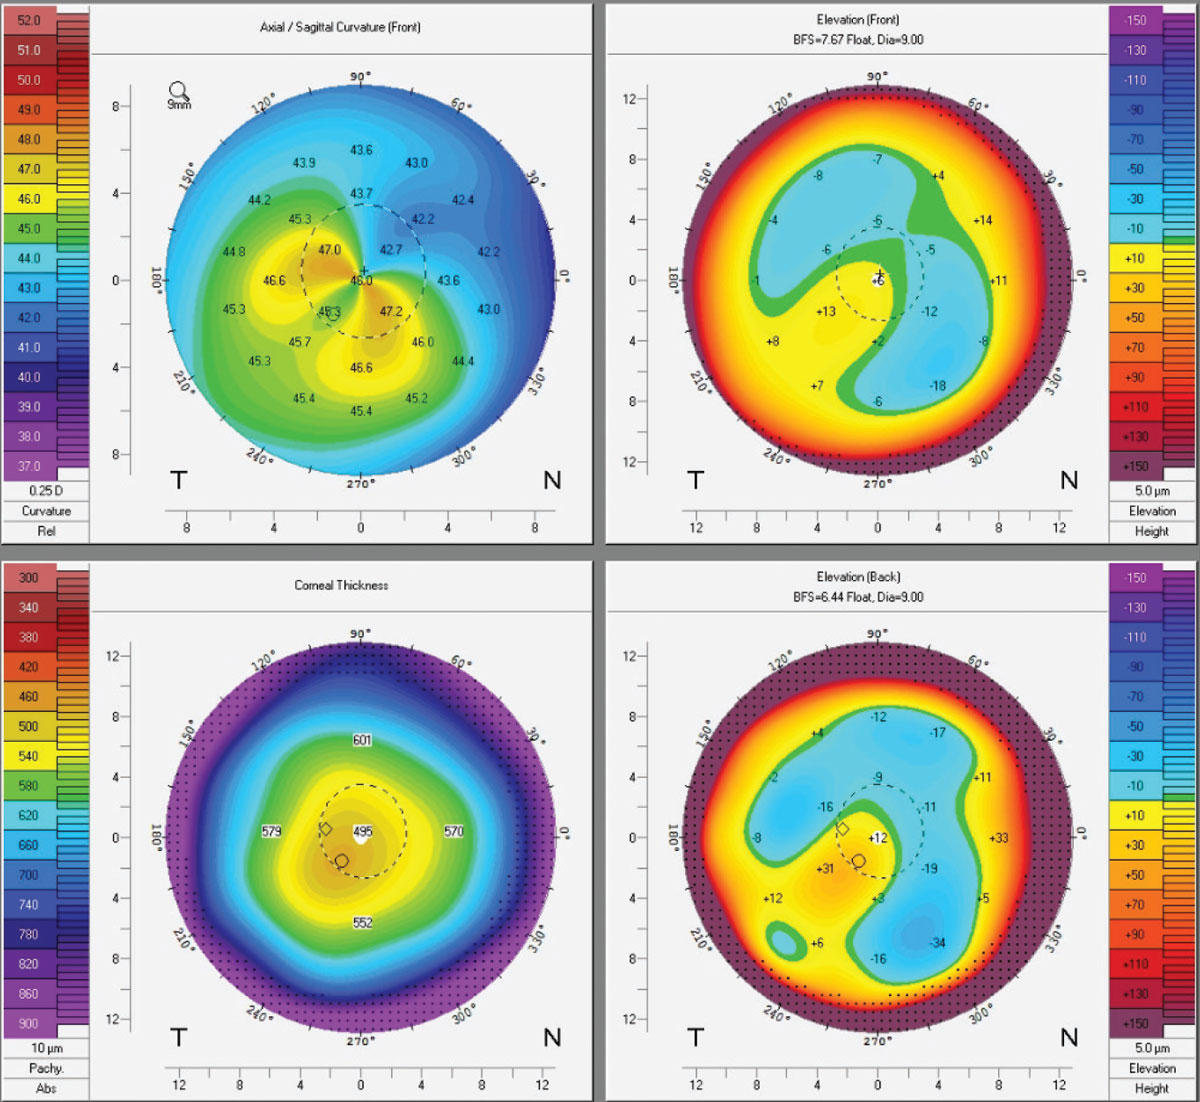 Topographies of an early keratoconus patient post-CXL. Crosslinking binds collagen fibers to adjacent ones using riboflavin drops and UV light. While some Kmax flattening occurs, patients should be told that CXL is done to reduce progression, not improve vision.